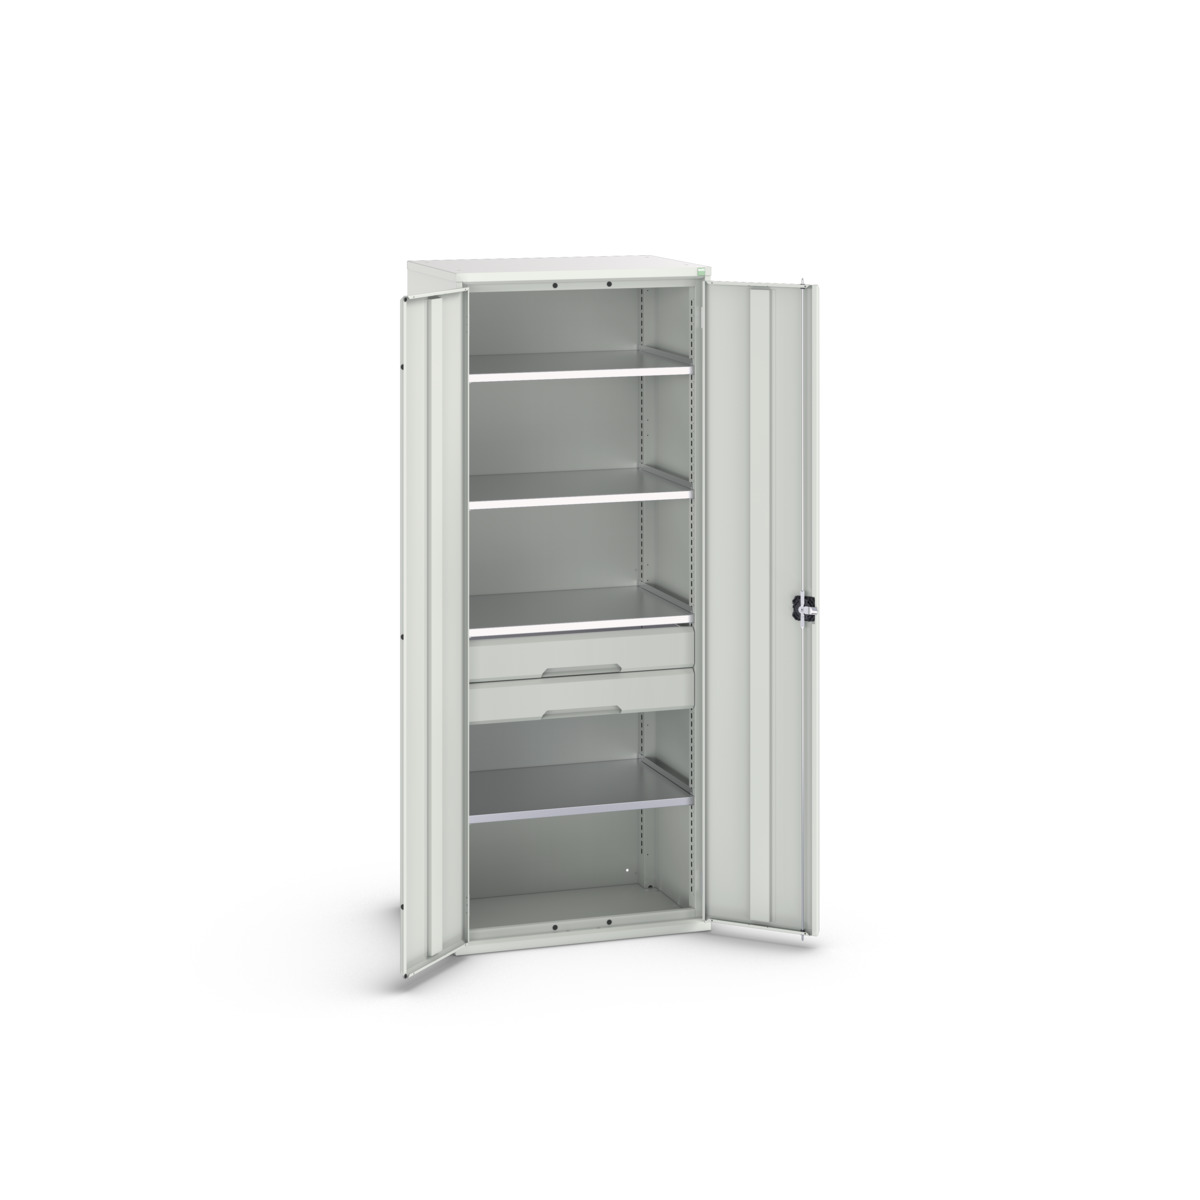 16926455.16 - verso kitted cupboard